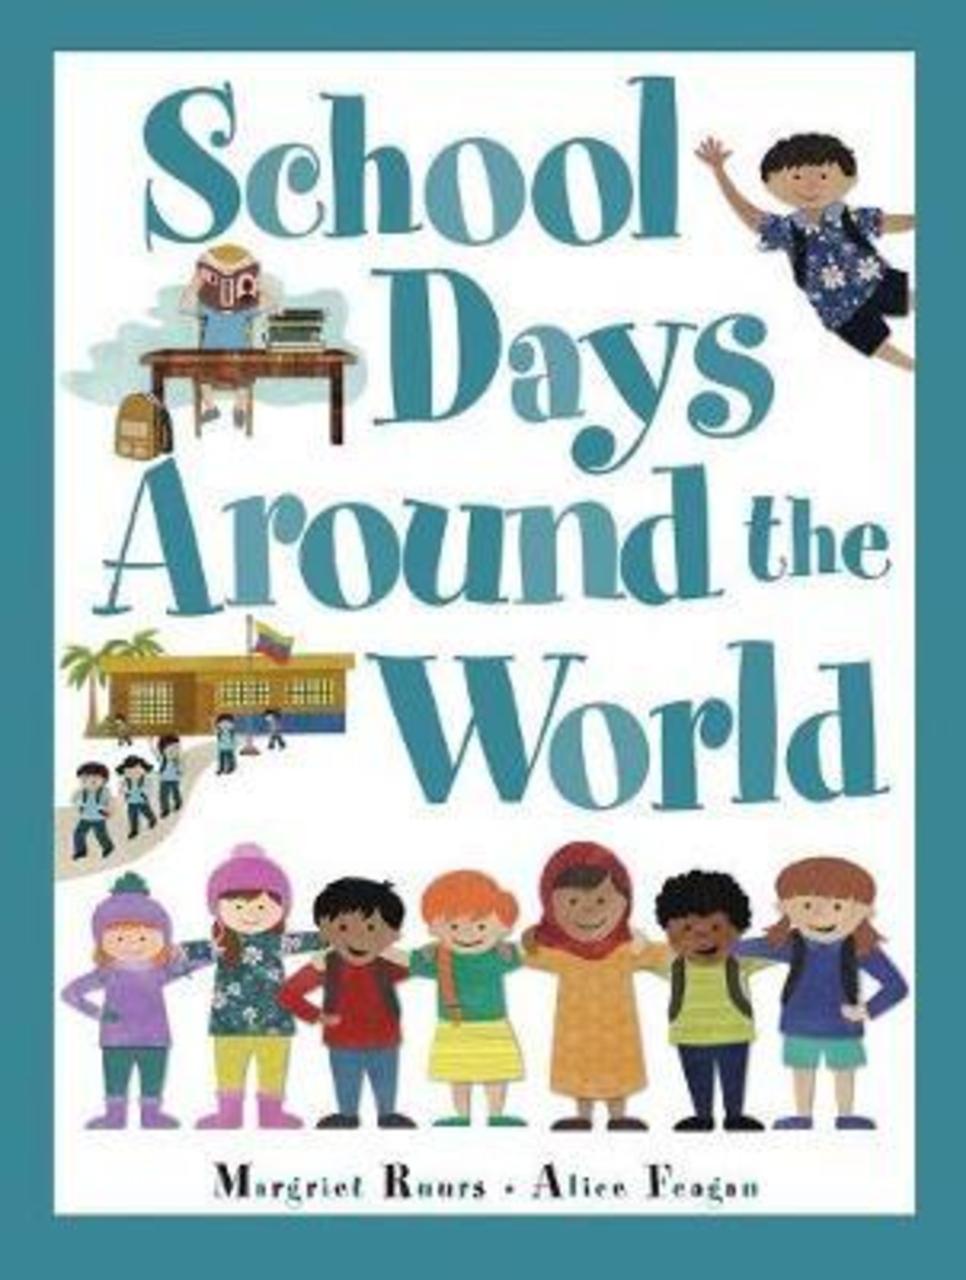 Sách - School Days Around The World (international) by Margriet Ruurs Alice Feagan (paperback)